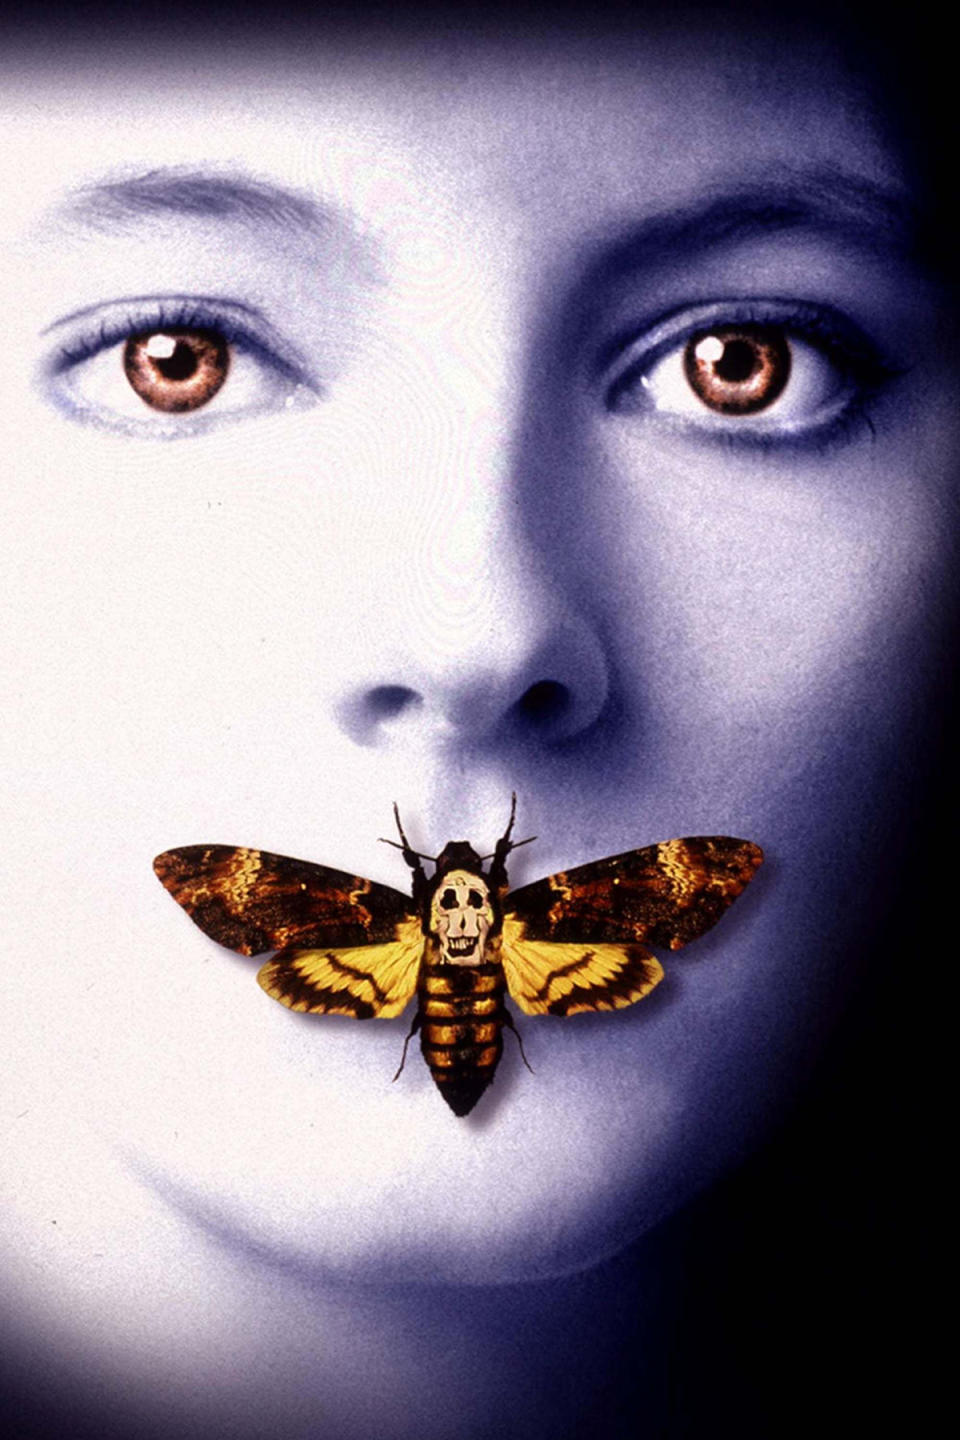 Jodie Foster Shares 9 Secrets of 'Silence of the Lambs'